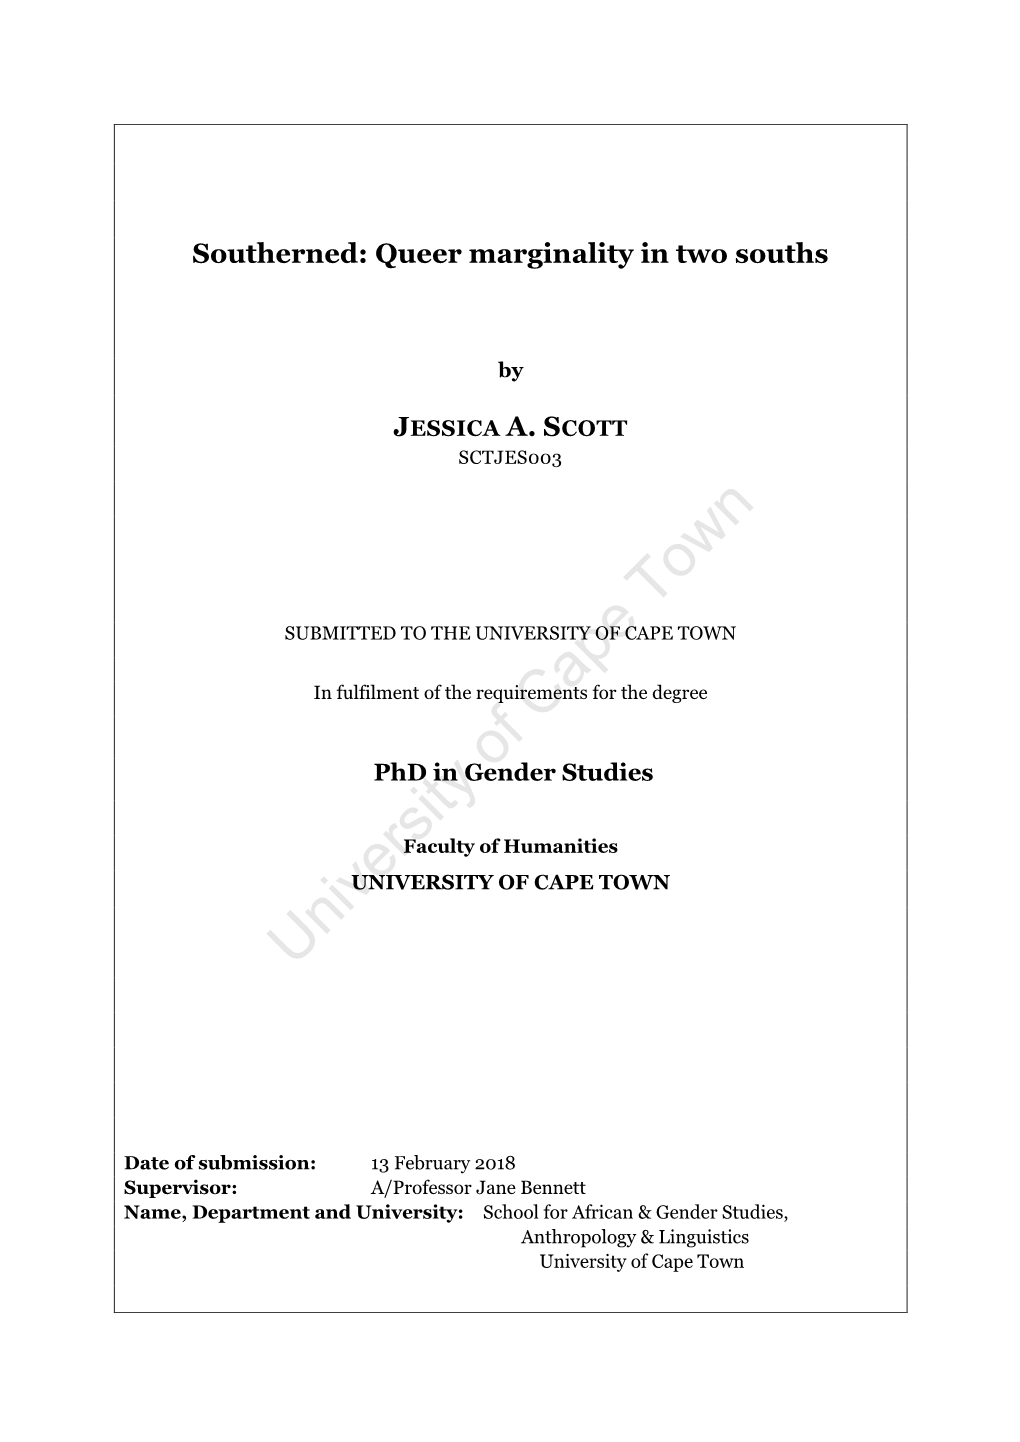 Southerned: Queer Marginality in Two Souths